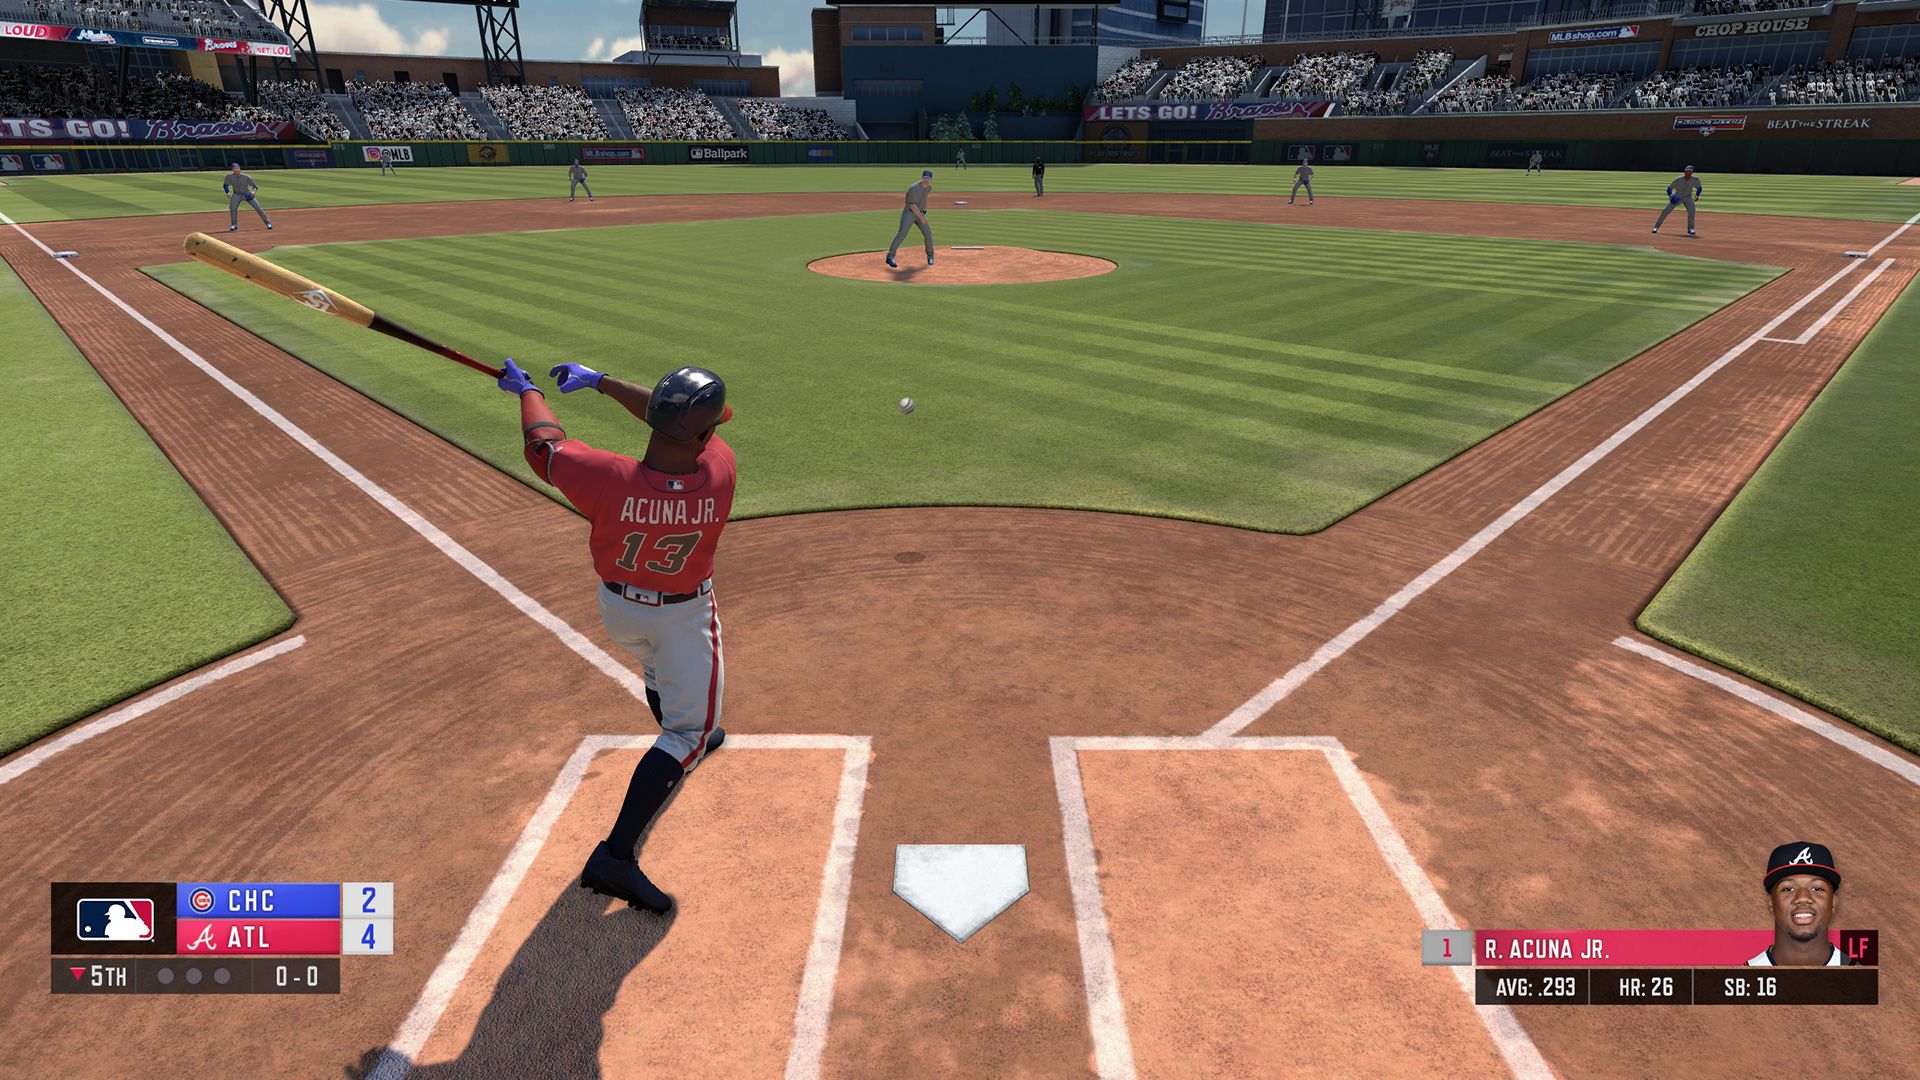 RBI Baseball 19 Review A Shallow and Frustrating Strike Out